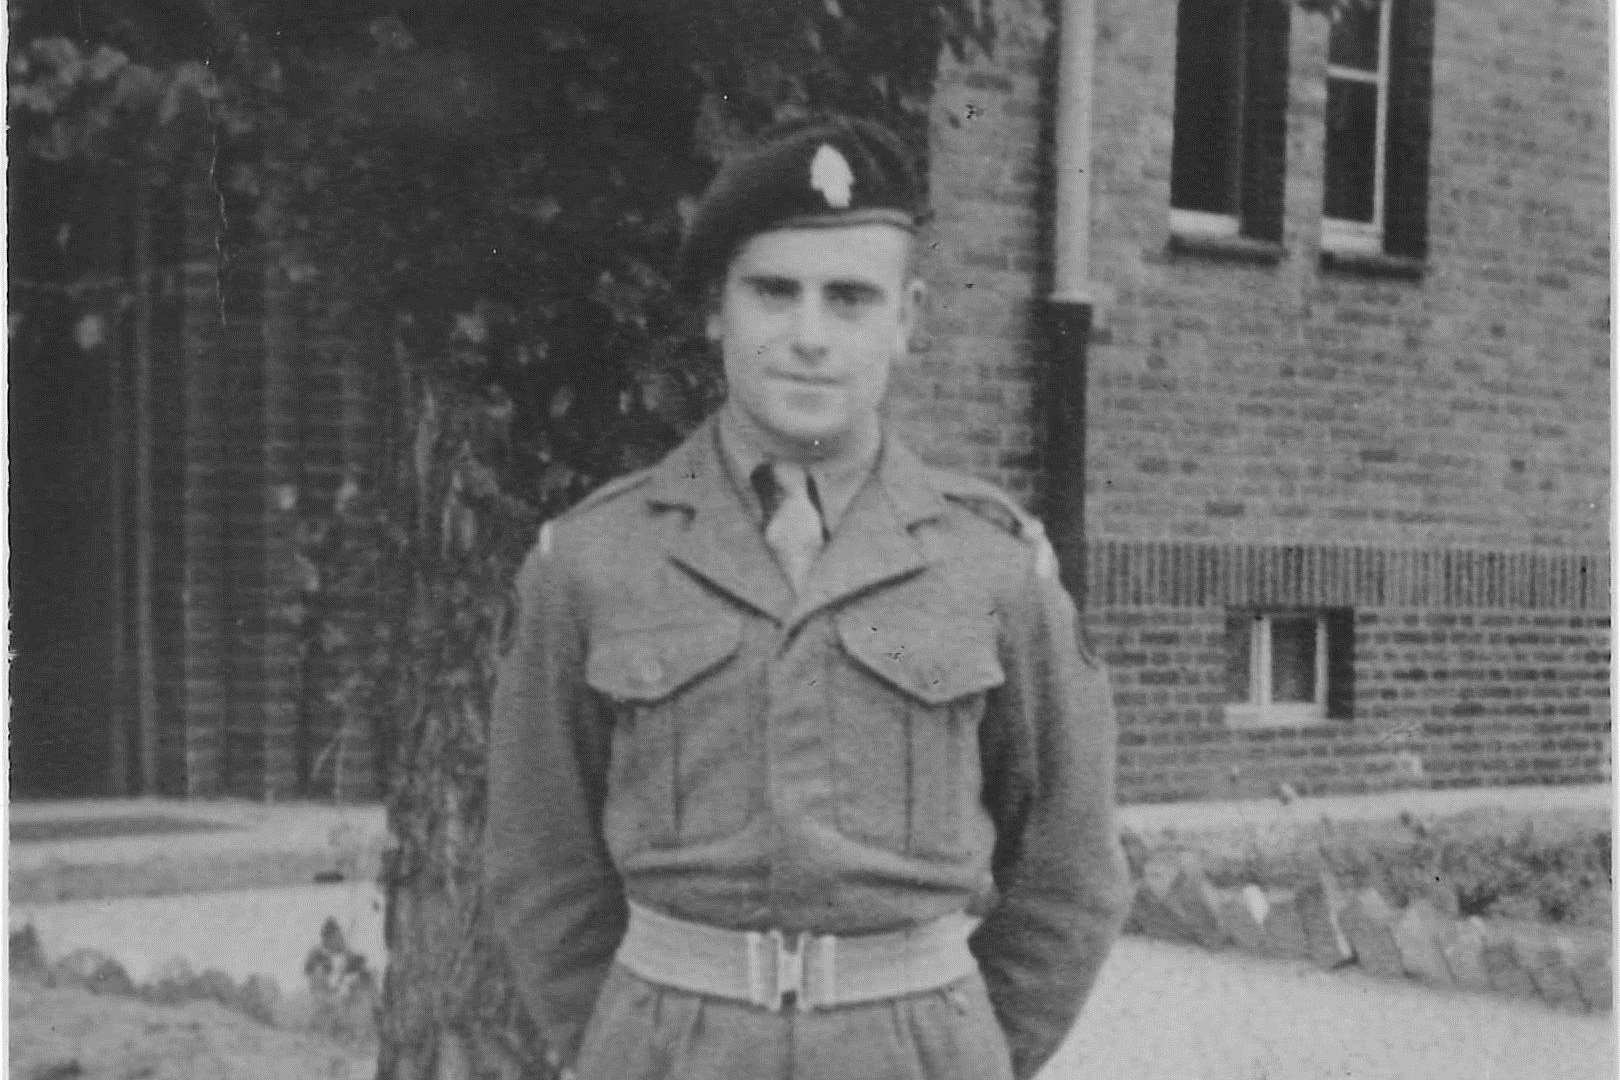 Cyril Neame during his National Service in the army